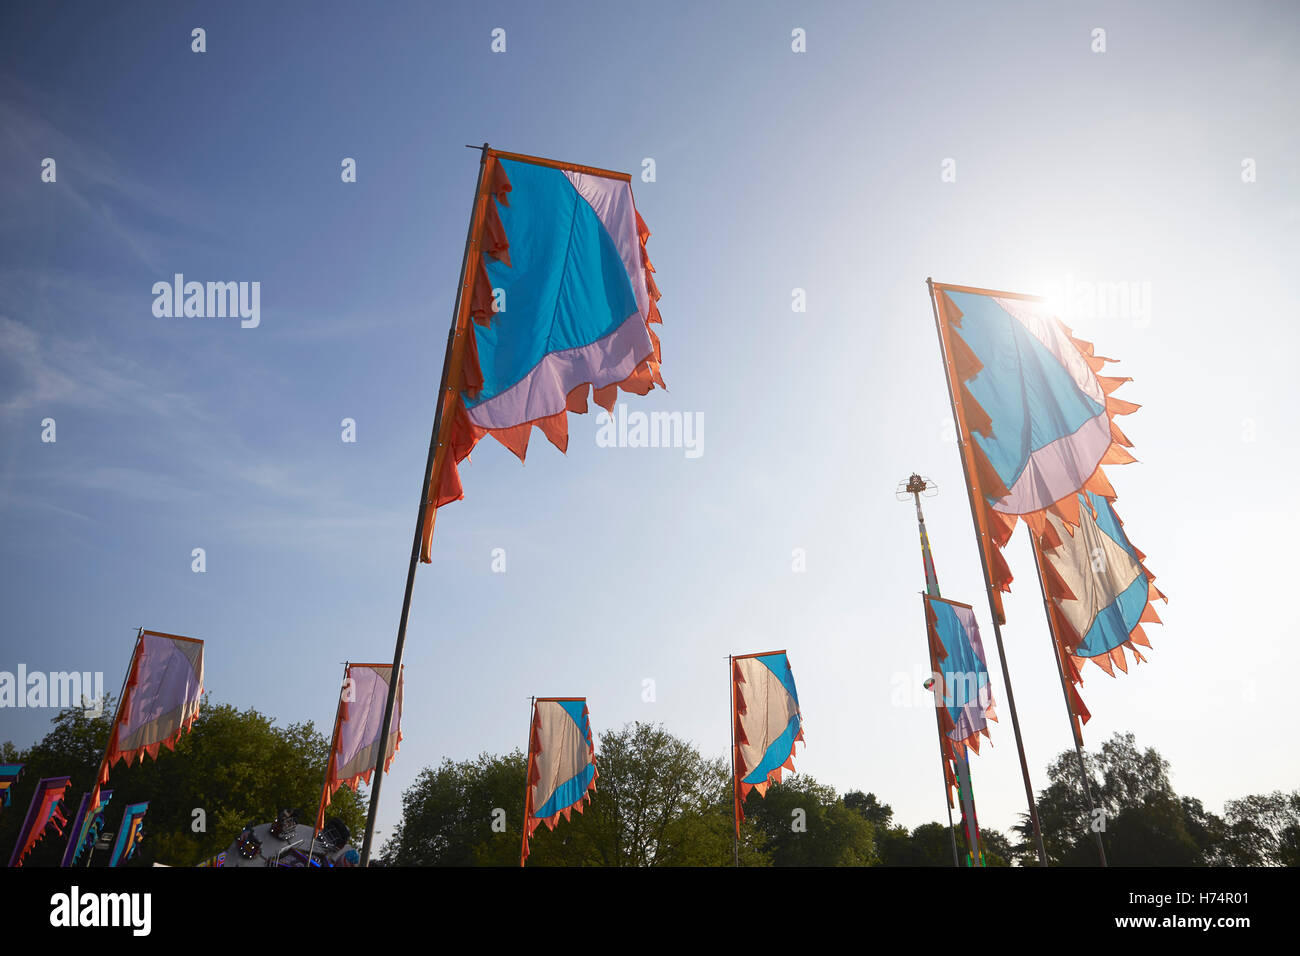 Flags Flying At Outdoor Music Festival Stock Photo